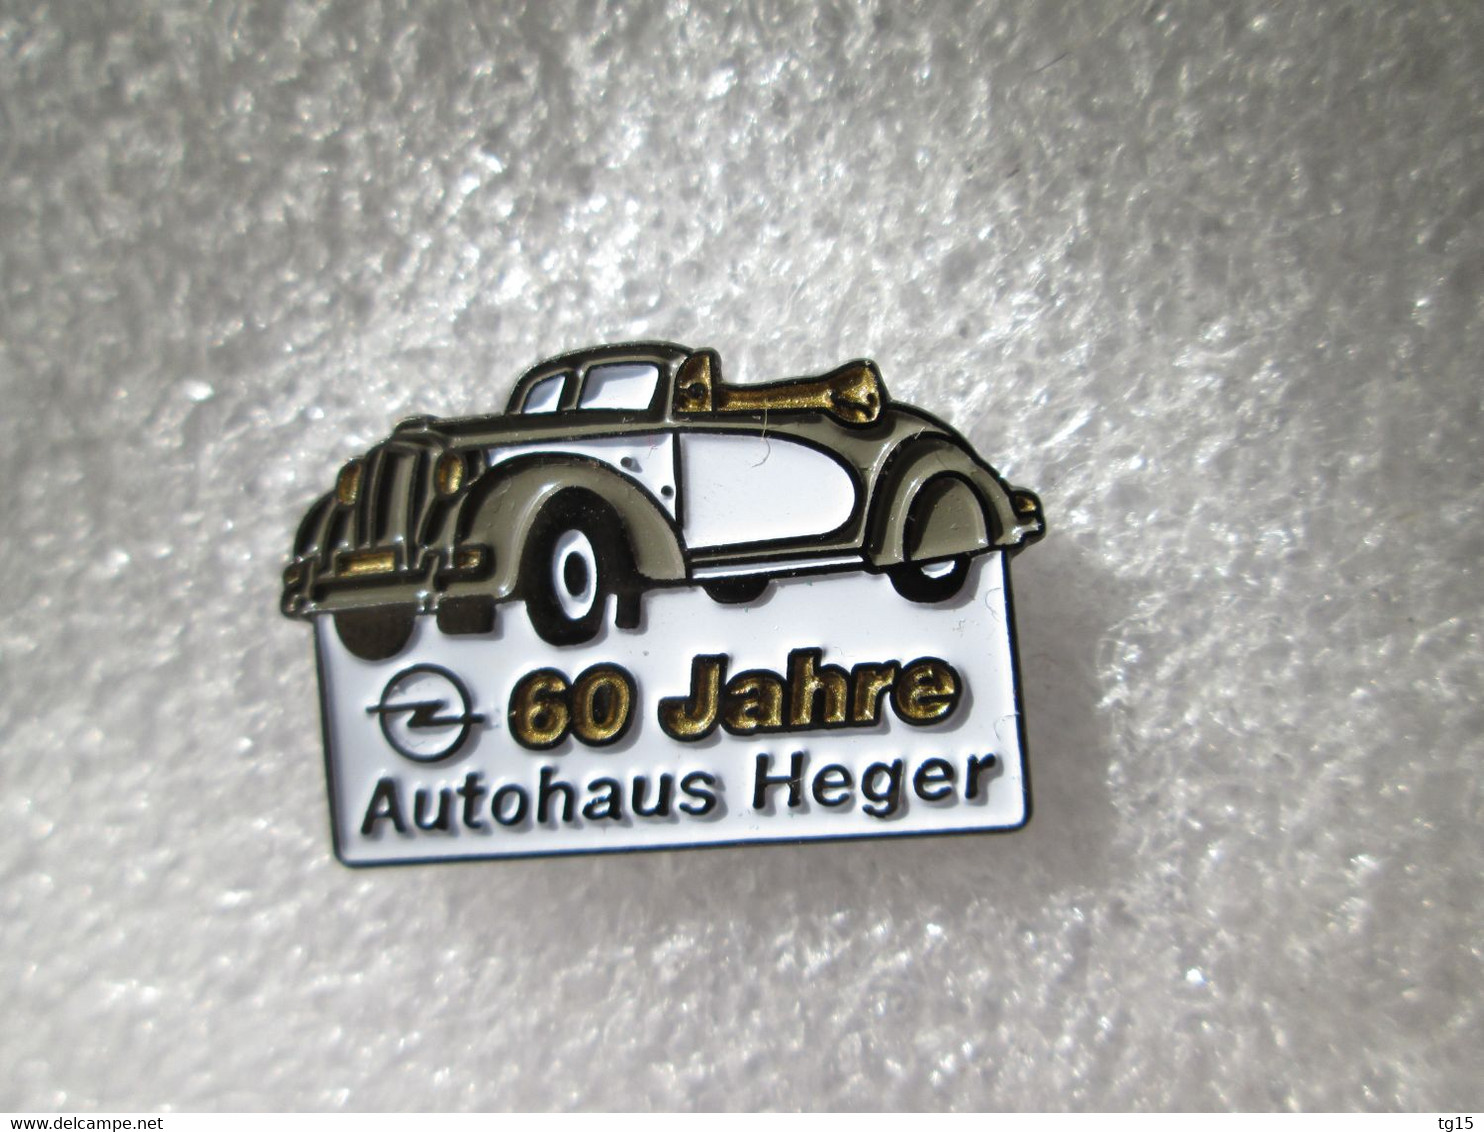 RARE PIN'S OPEL SUPER 6 60 JAHRE AUTOHAUS HEGER - Opel